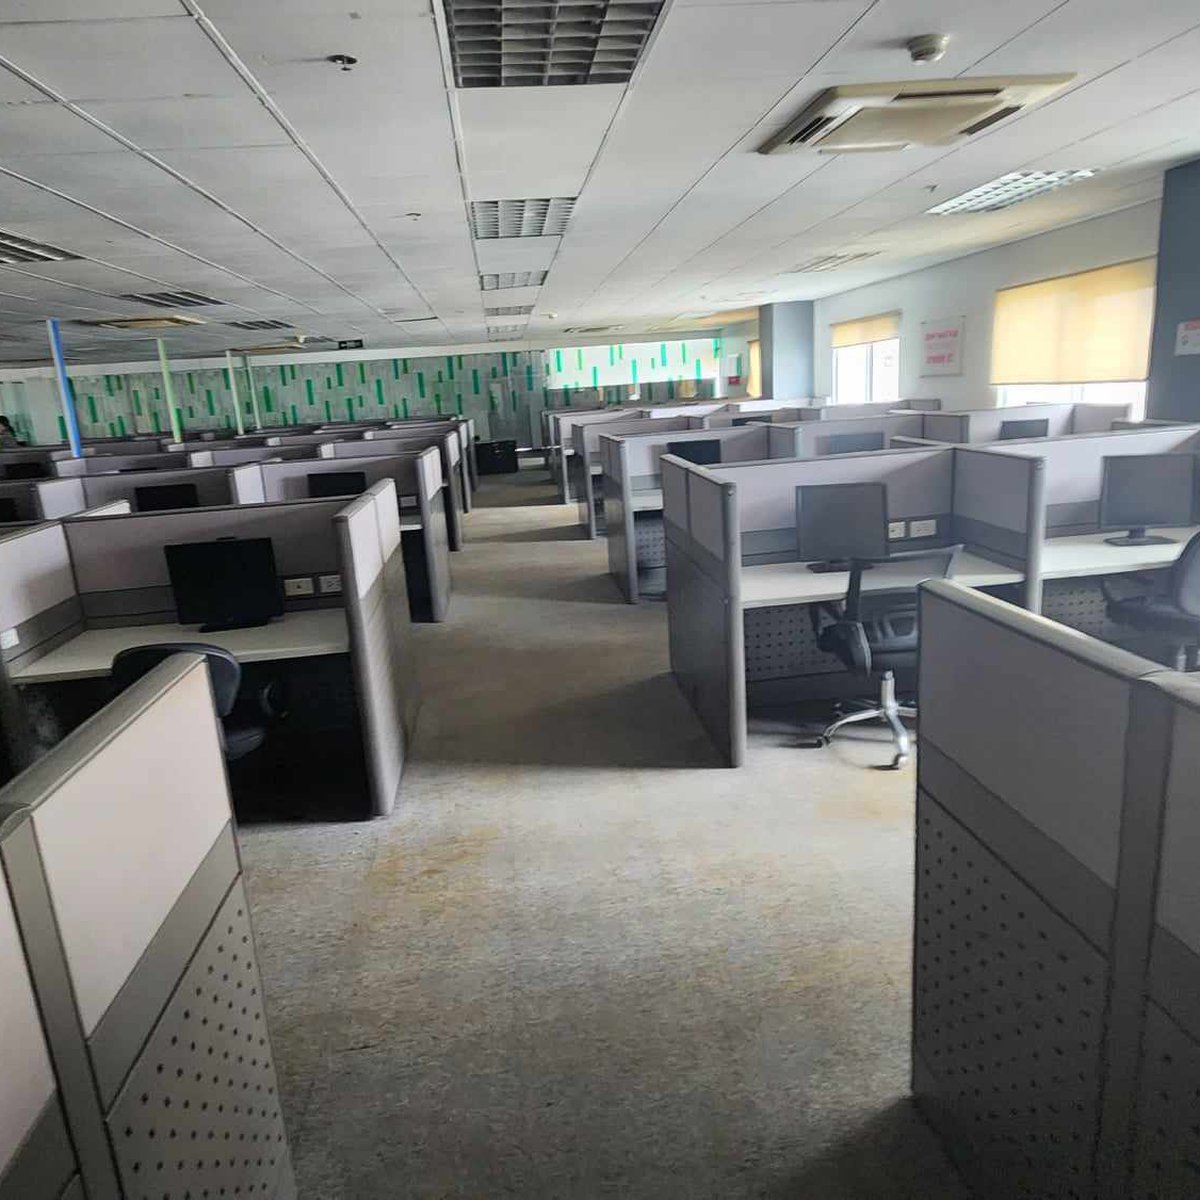 For Rent Lease BPO Office Space Mandaluyong City Manila 900sqm